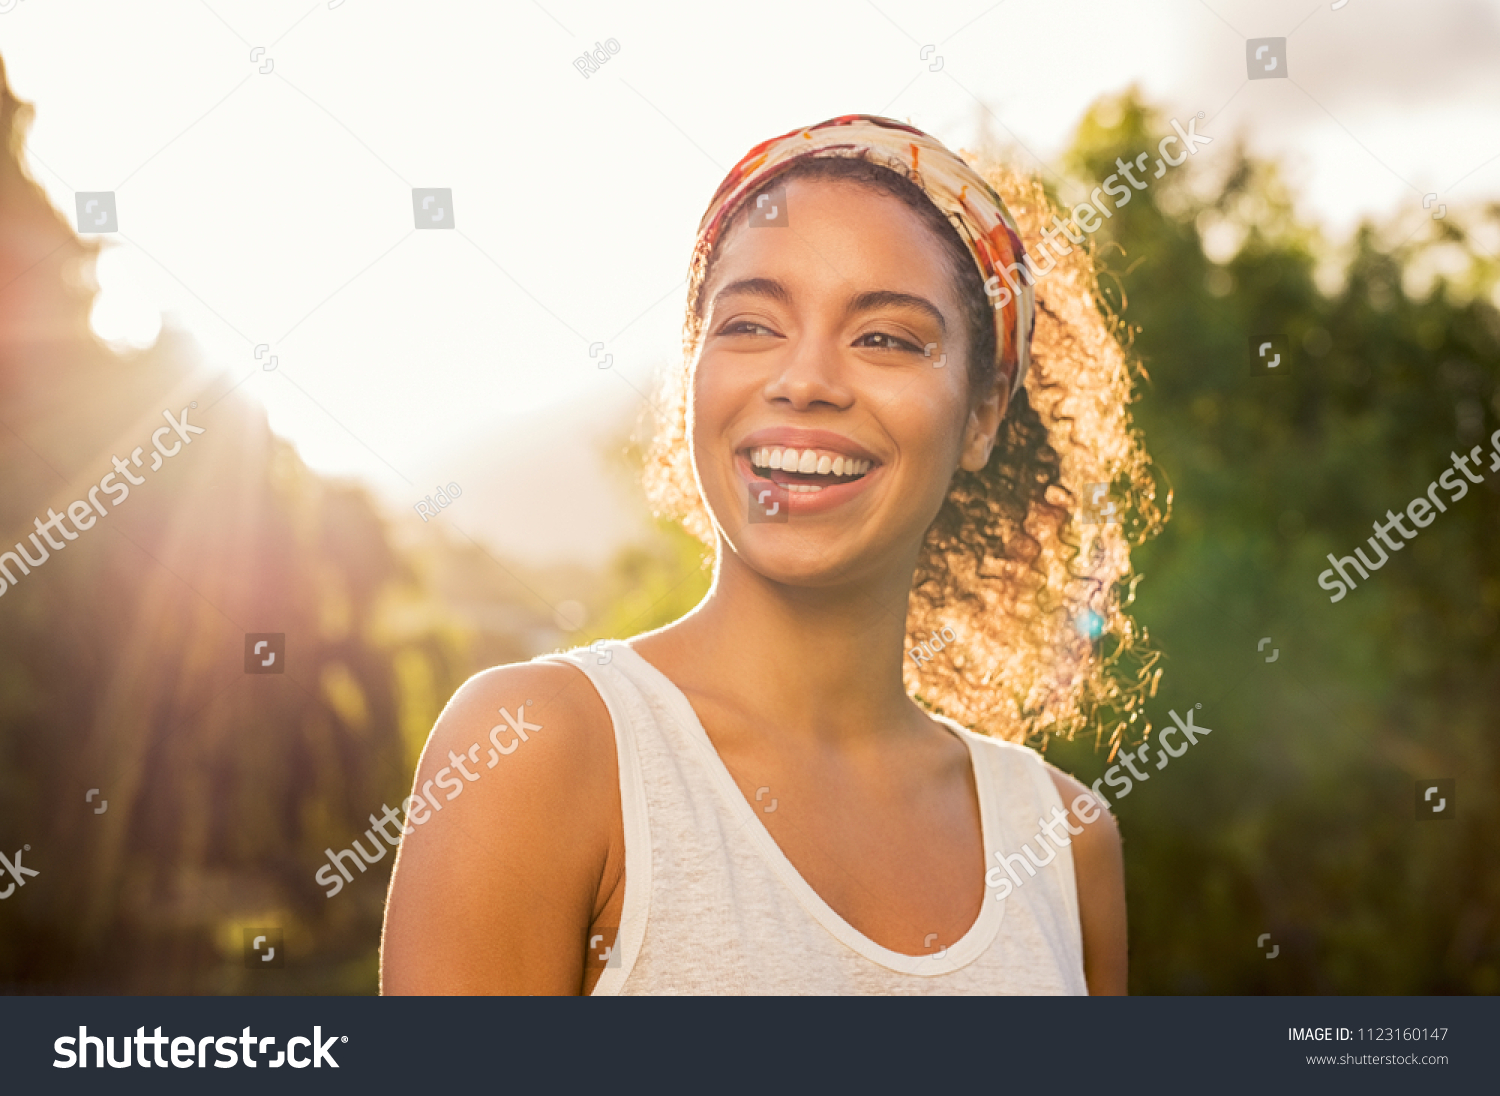 Portrait of beautiful african american woman smiling and looking away at park during sunset. Outdoor portrait of a smiling black girl. Happy cheerful girl laughing at park with colored hair band. #1123160147